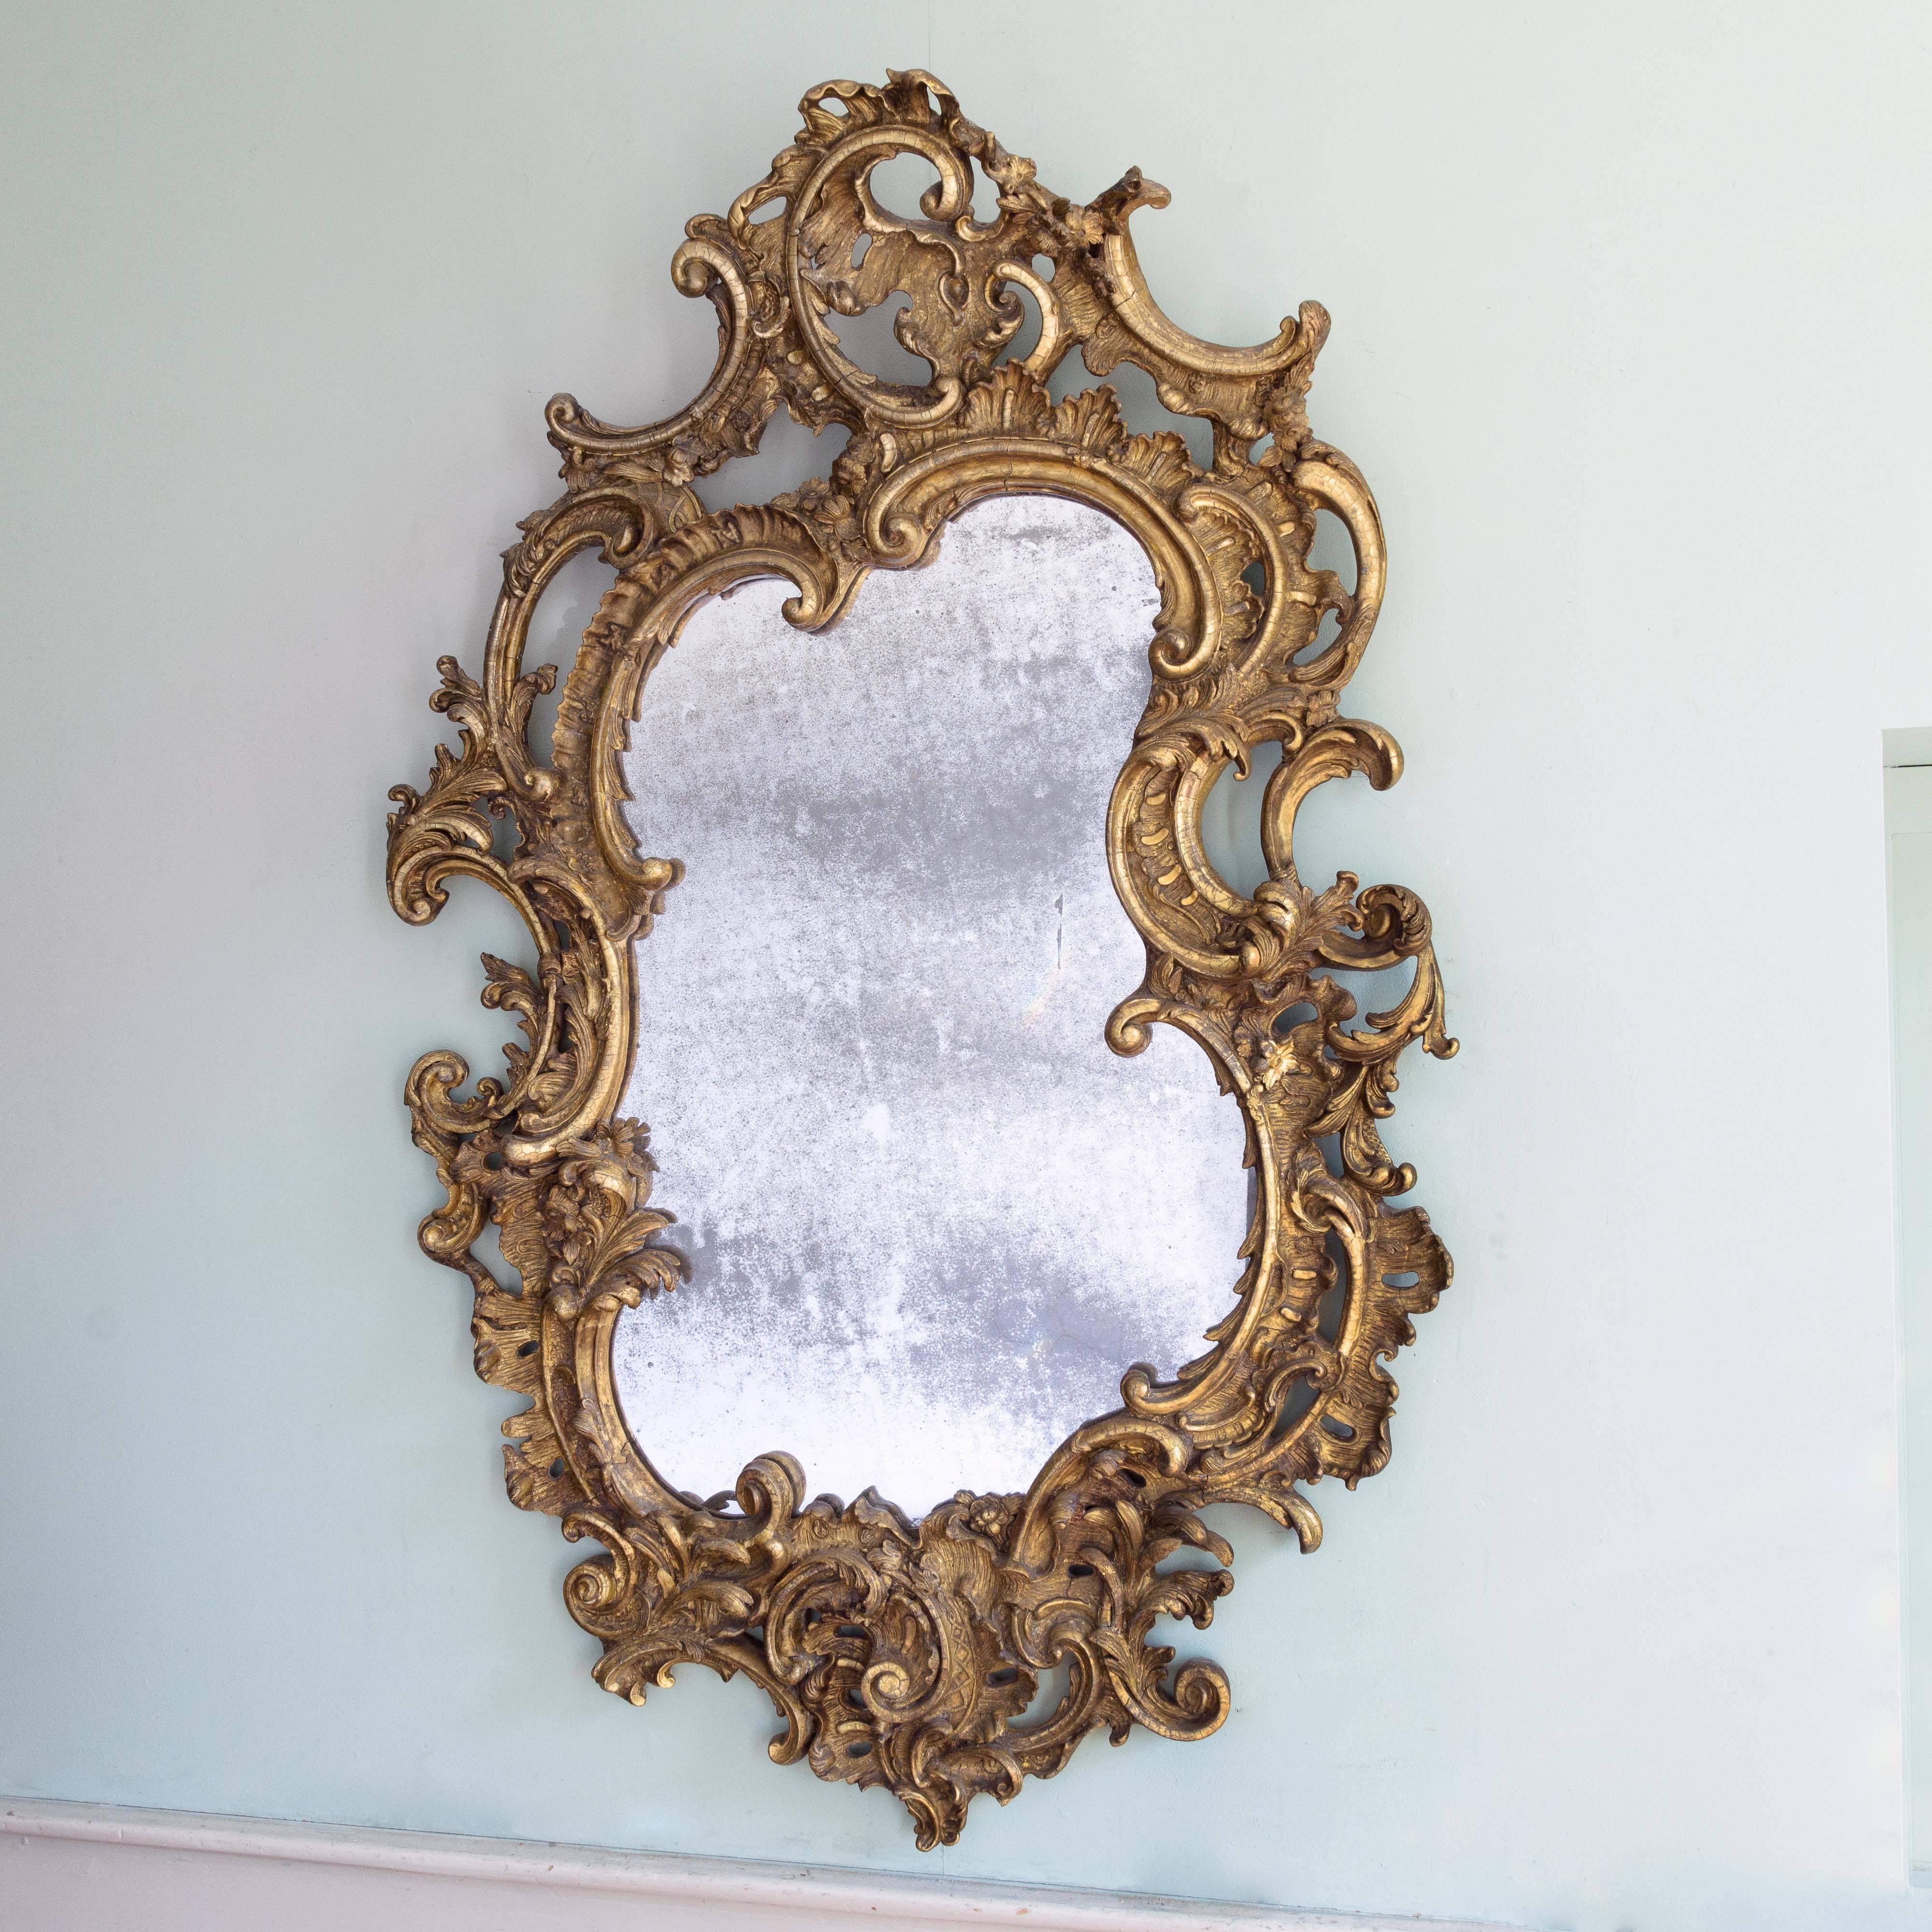 Early 19th Century Large Nineteenth Century English Rococo Revival Wall Mirror